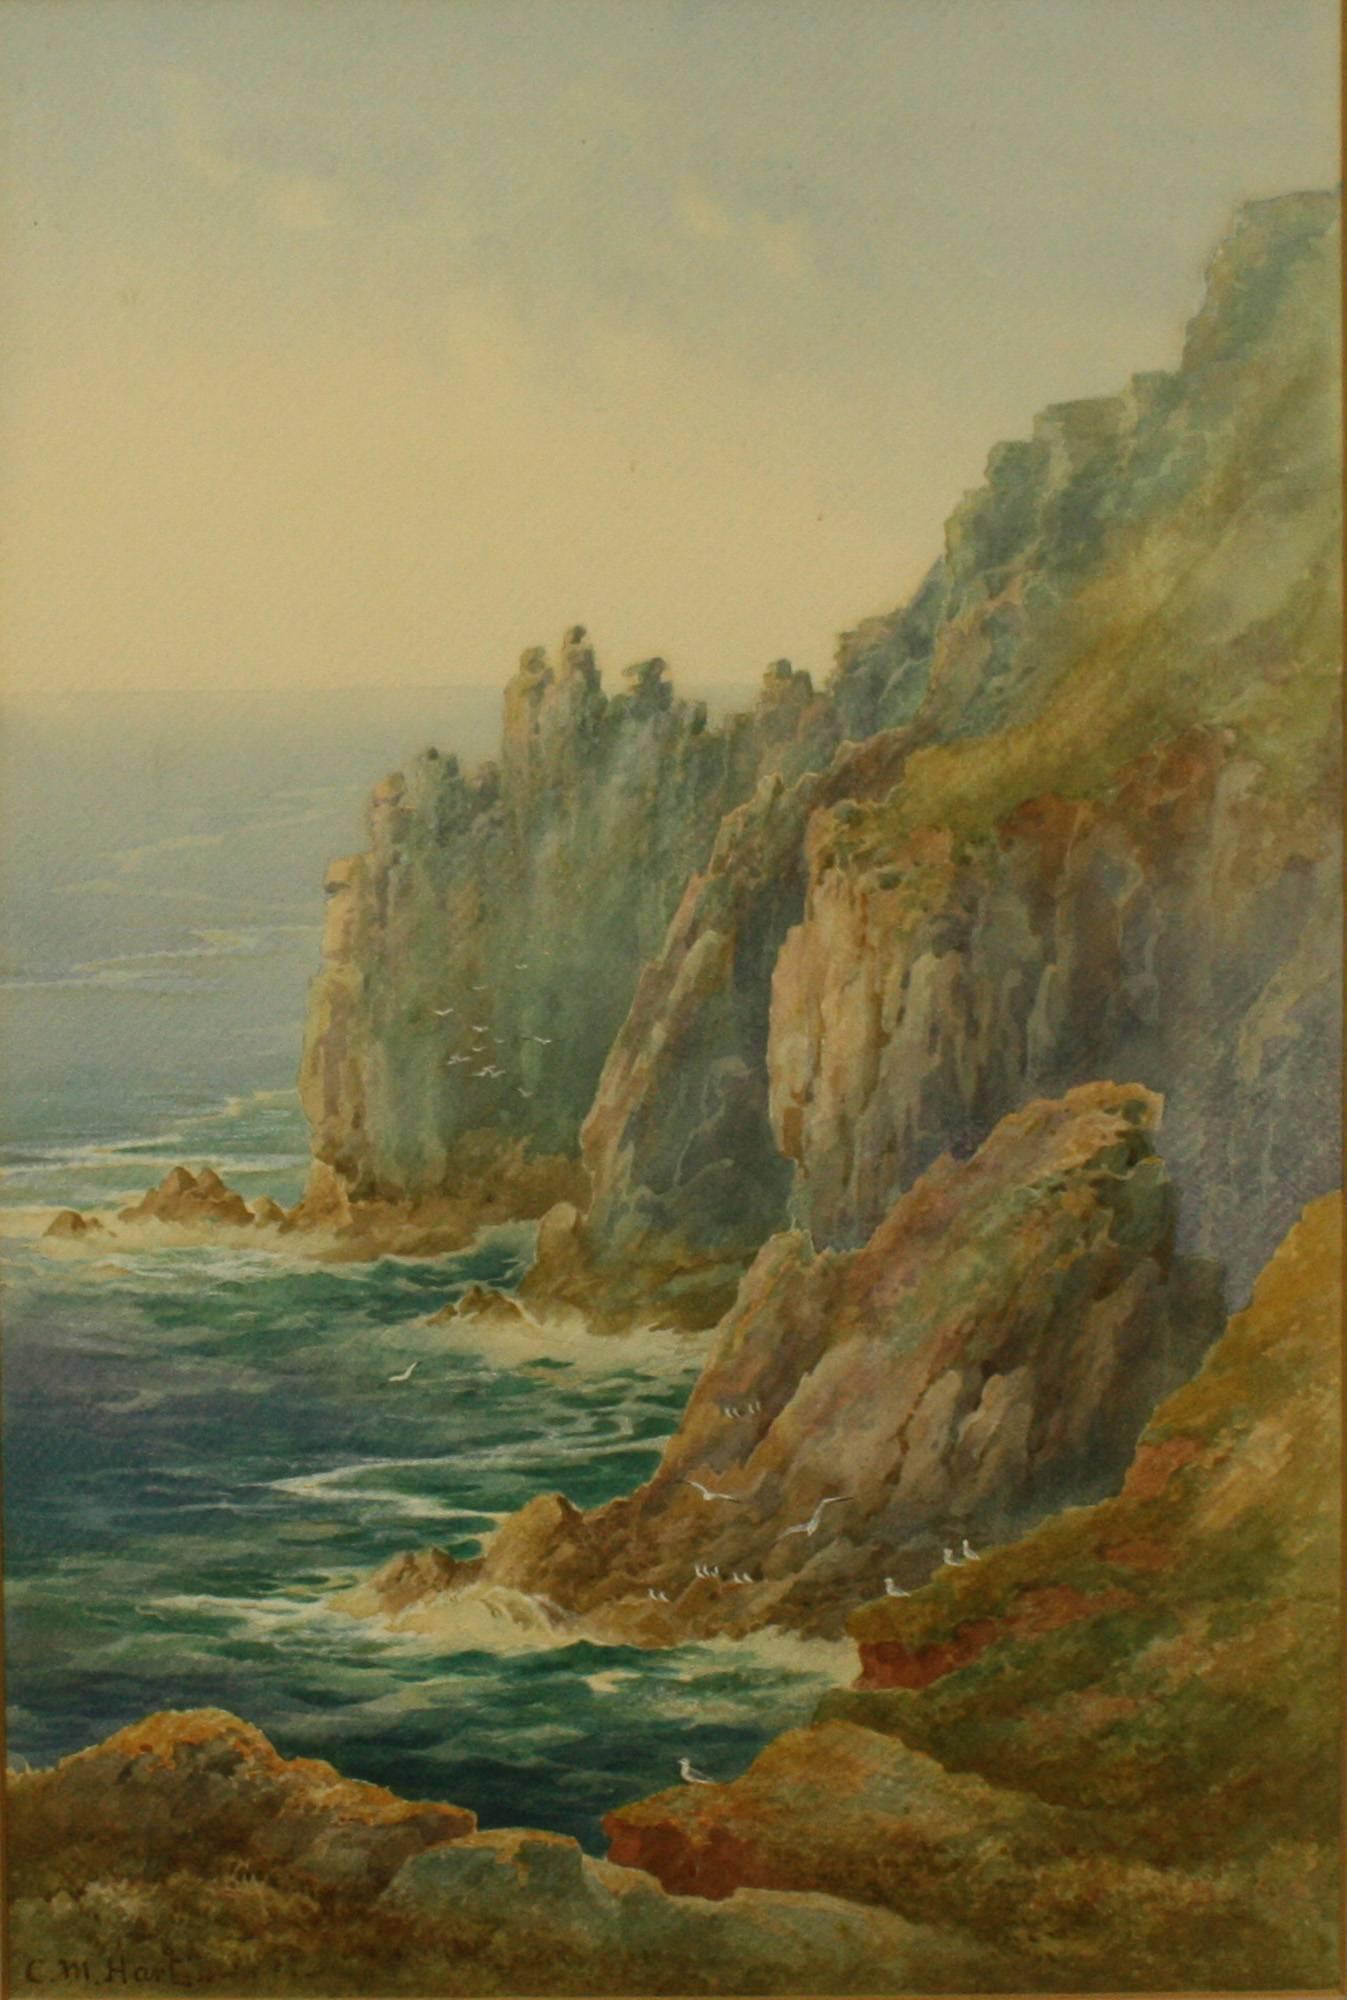 Lands End and Dollar Rock by C M Hart - Art by Claude Montague Hart